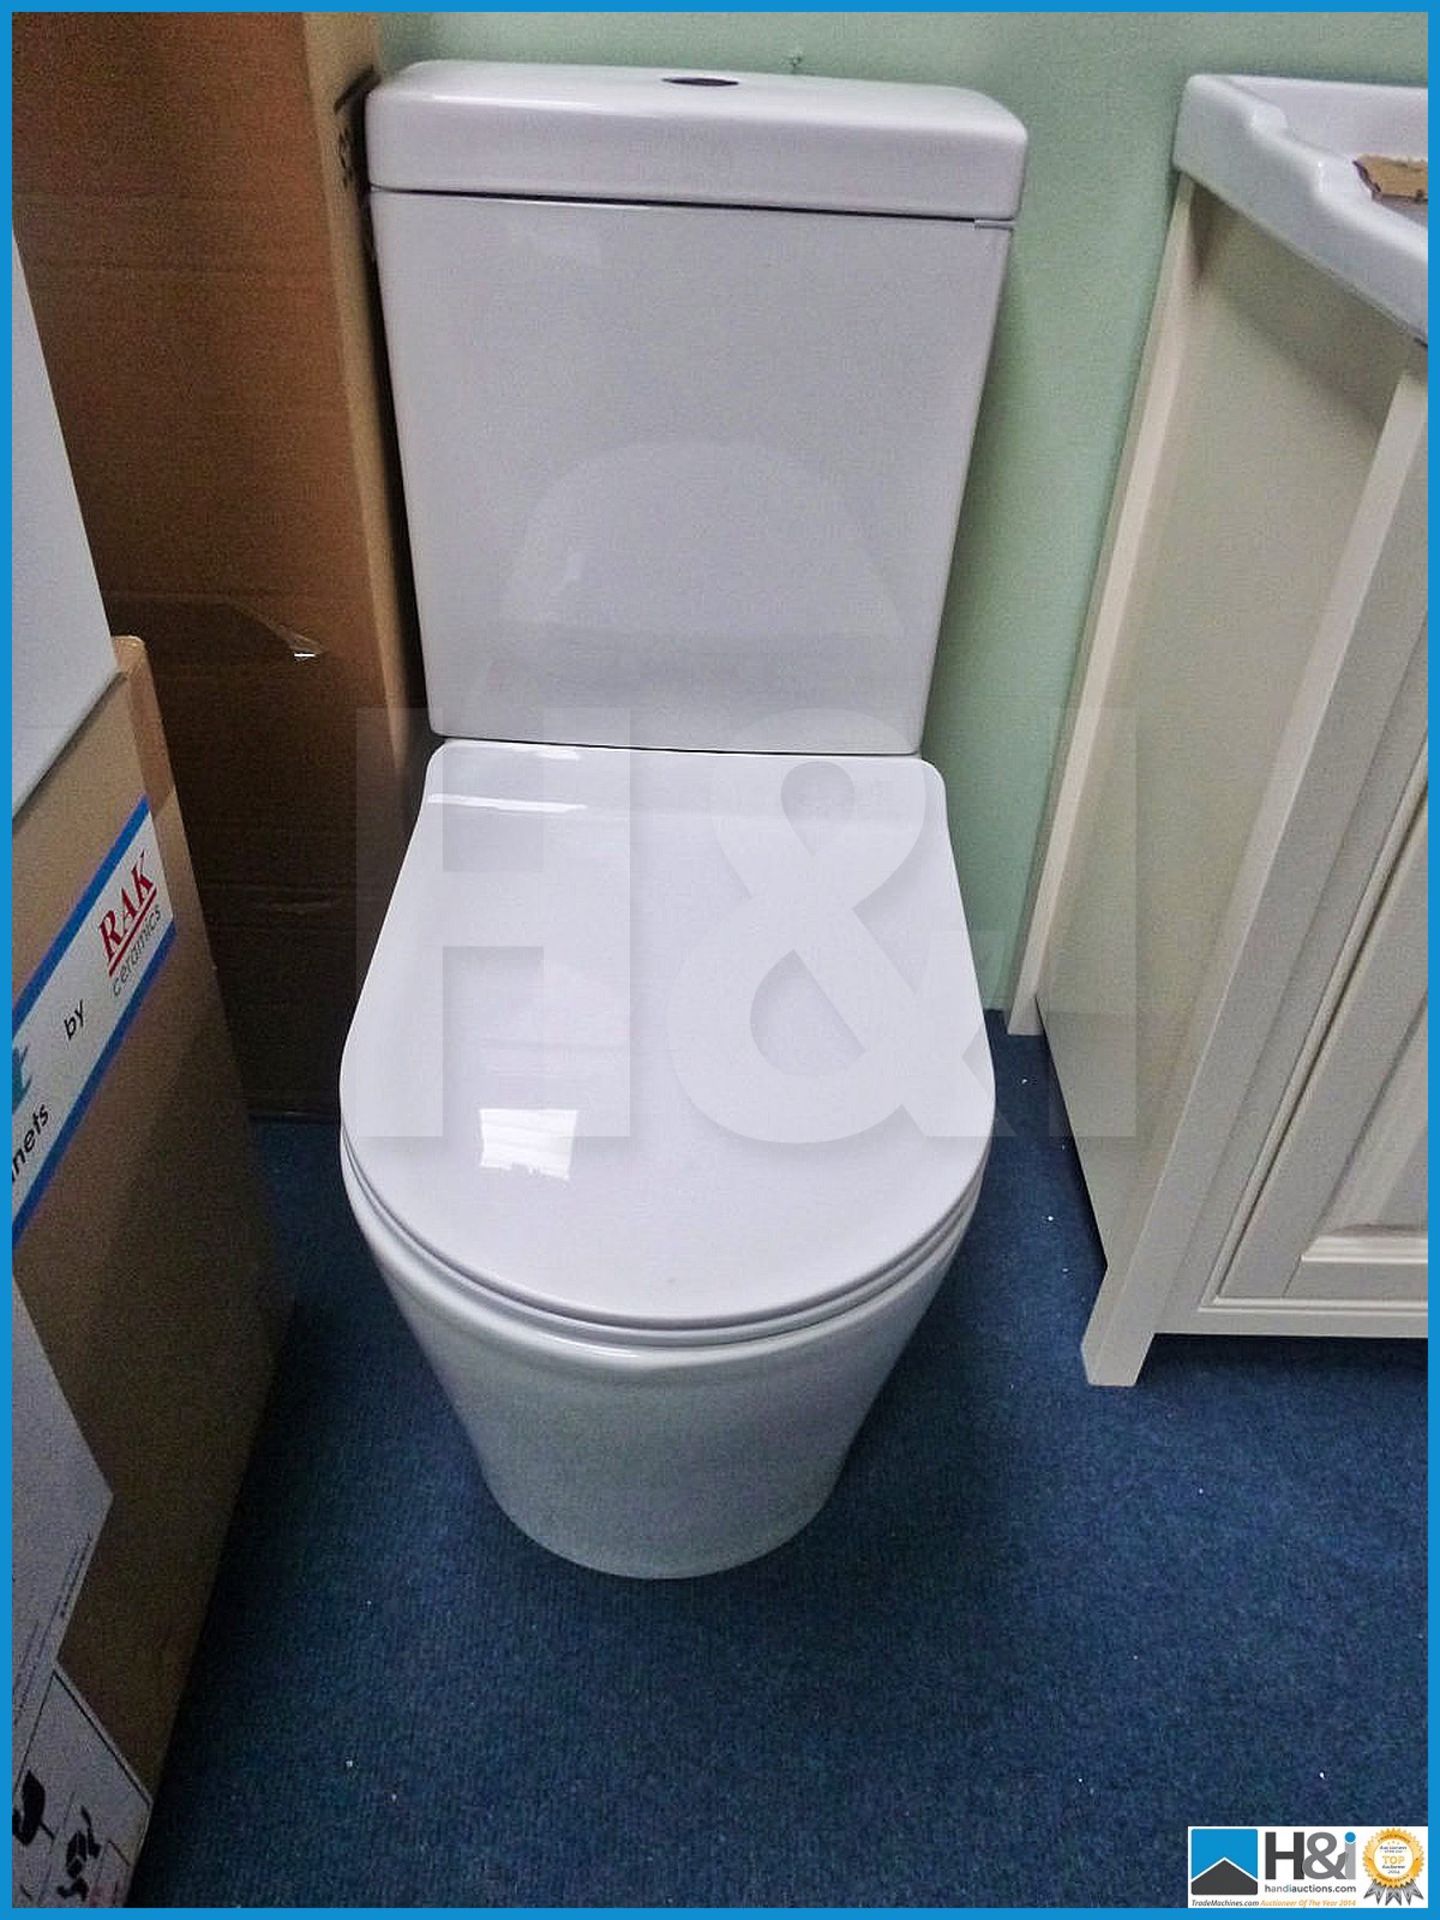 Designer K002 full facia close coupled WC with complimenting sandwich slim soft close seat. RRP £699